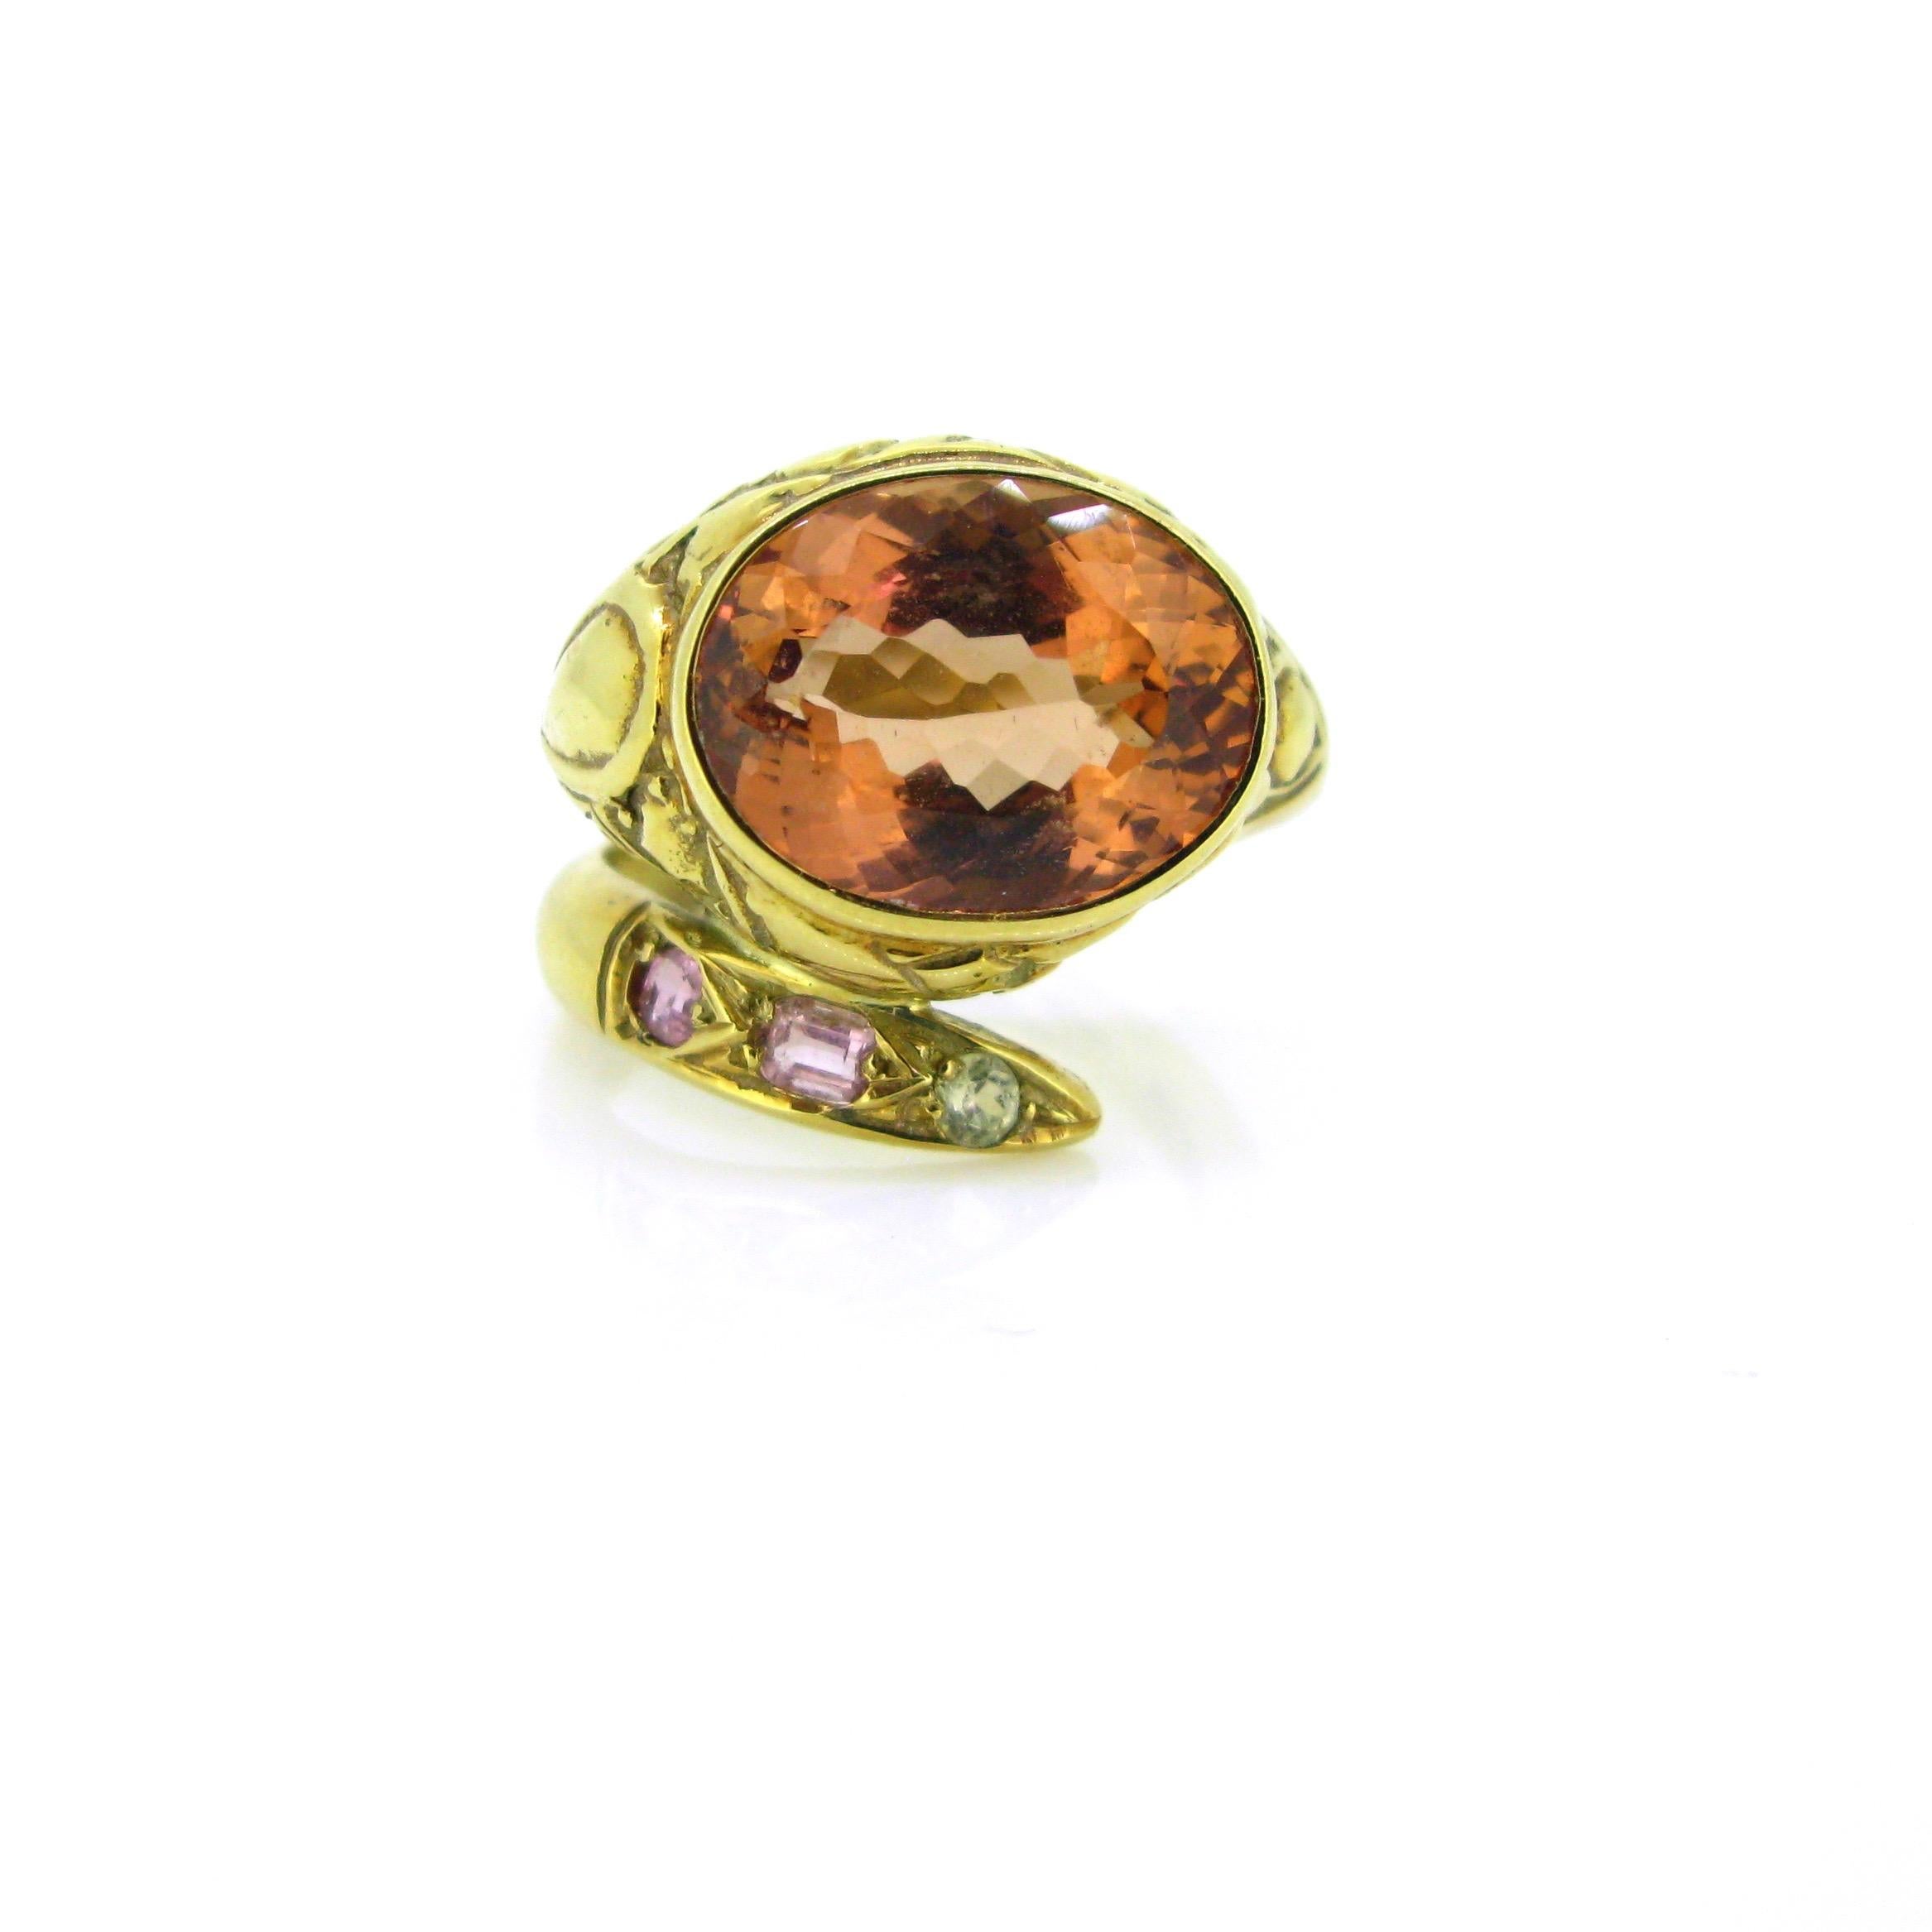 This ring represents a snake. His head is adorned with a stunning orange pinkish topaz weighing around 9.50ct. His tail is set with 3 naturals stones : 2 of them are pinks with naturals inclusions and the last one has a light green color. They might